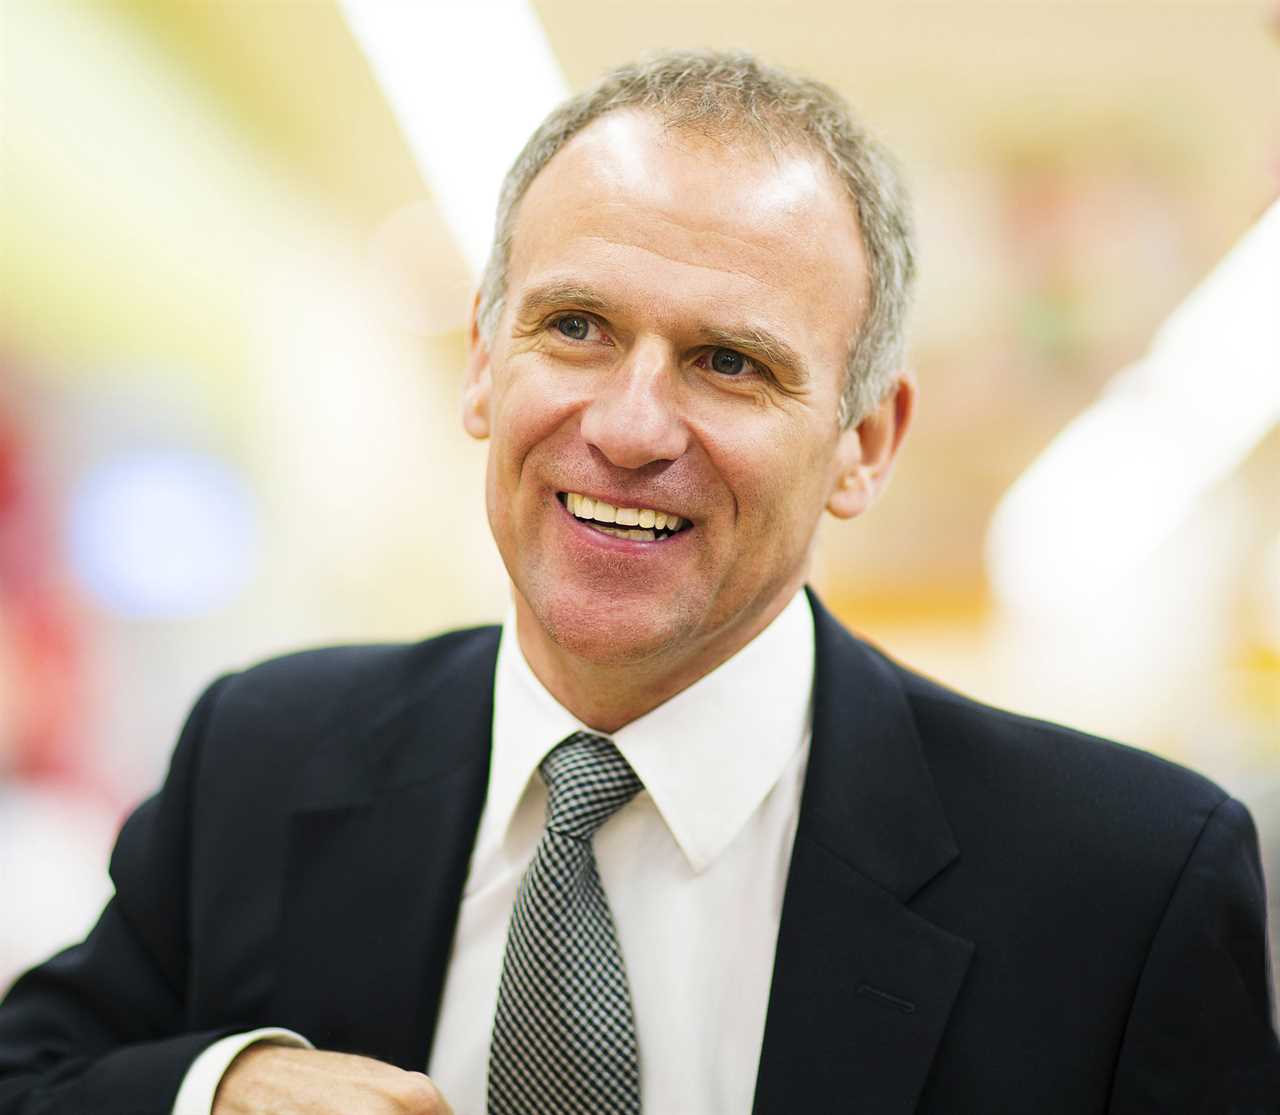 Former Tesco boss has been enlisted by the PM to save Christmas amidst supply chain crisis